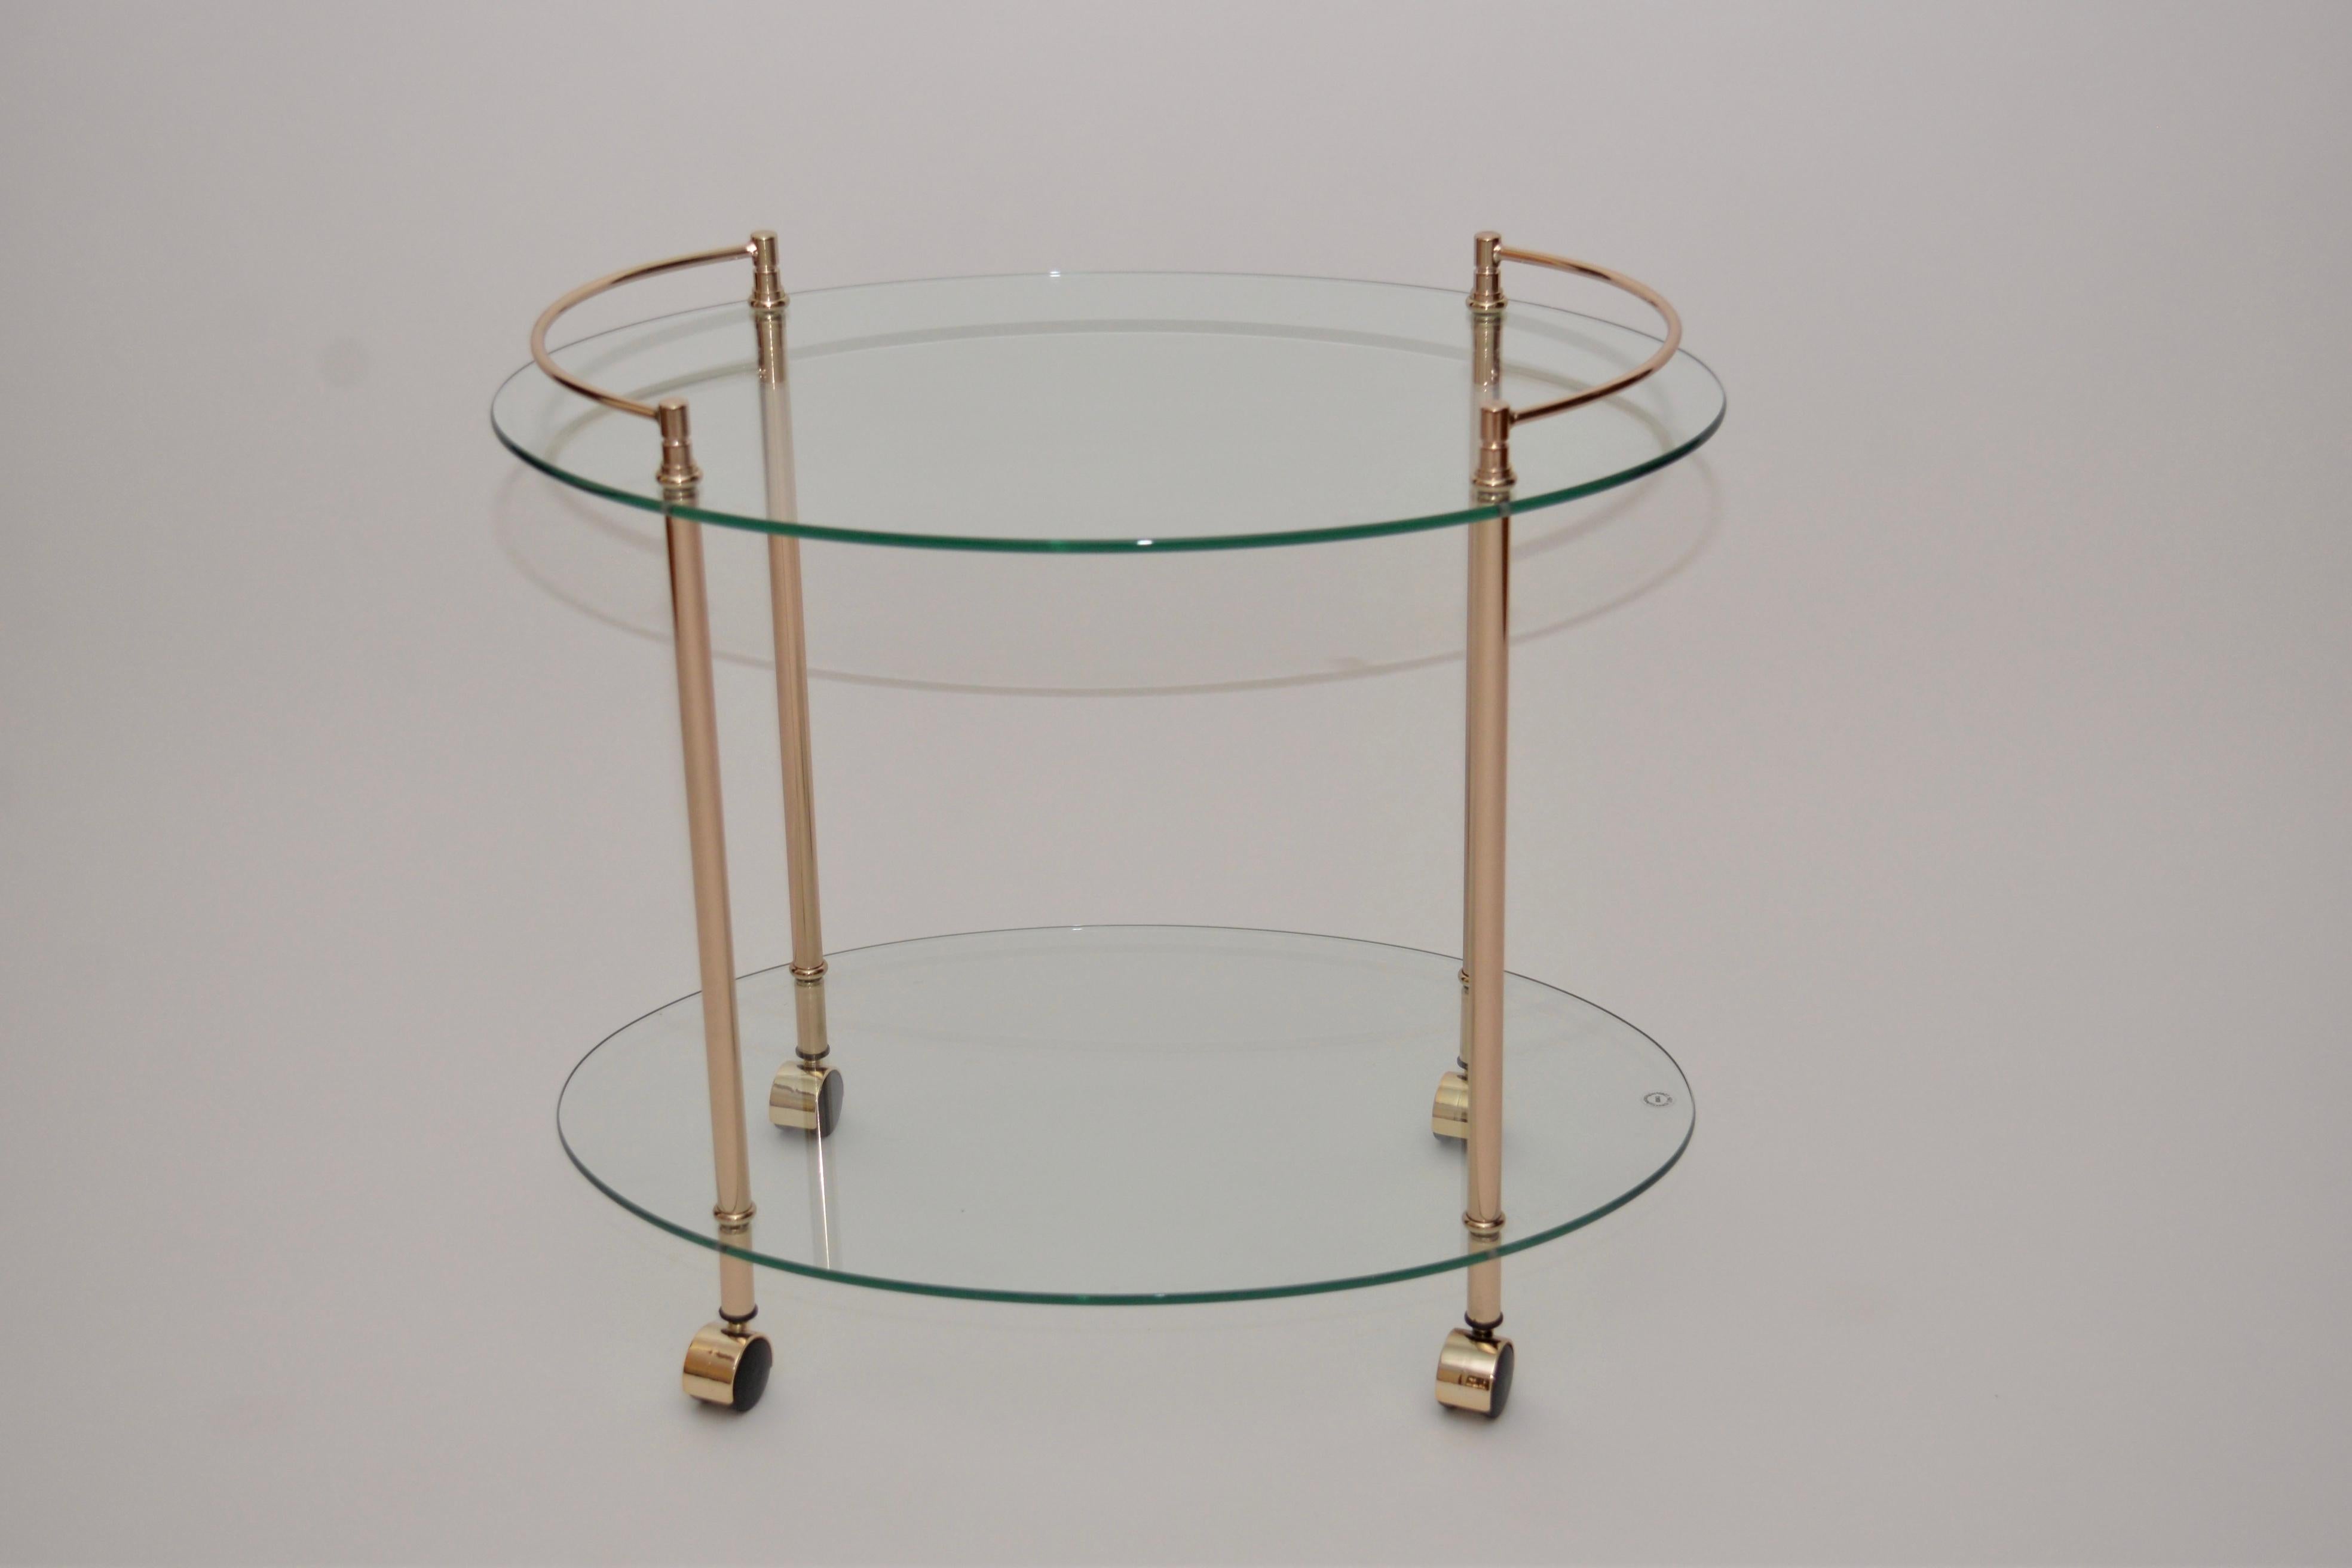 A vintage French polished brass and glass drinks/serving trolley, circa 1980s. This trolley is a Classic oval shape with two-tier tempered glass shelves.